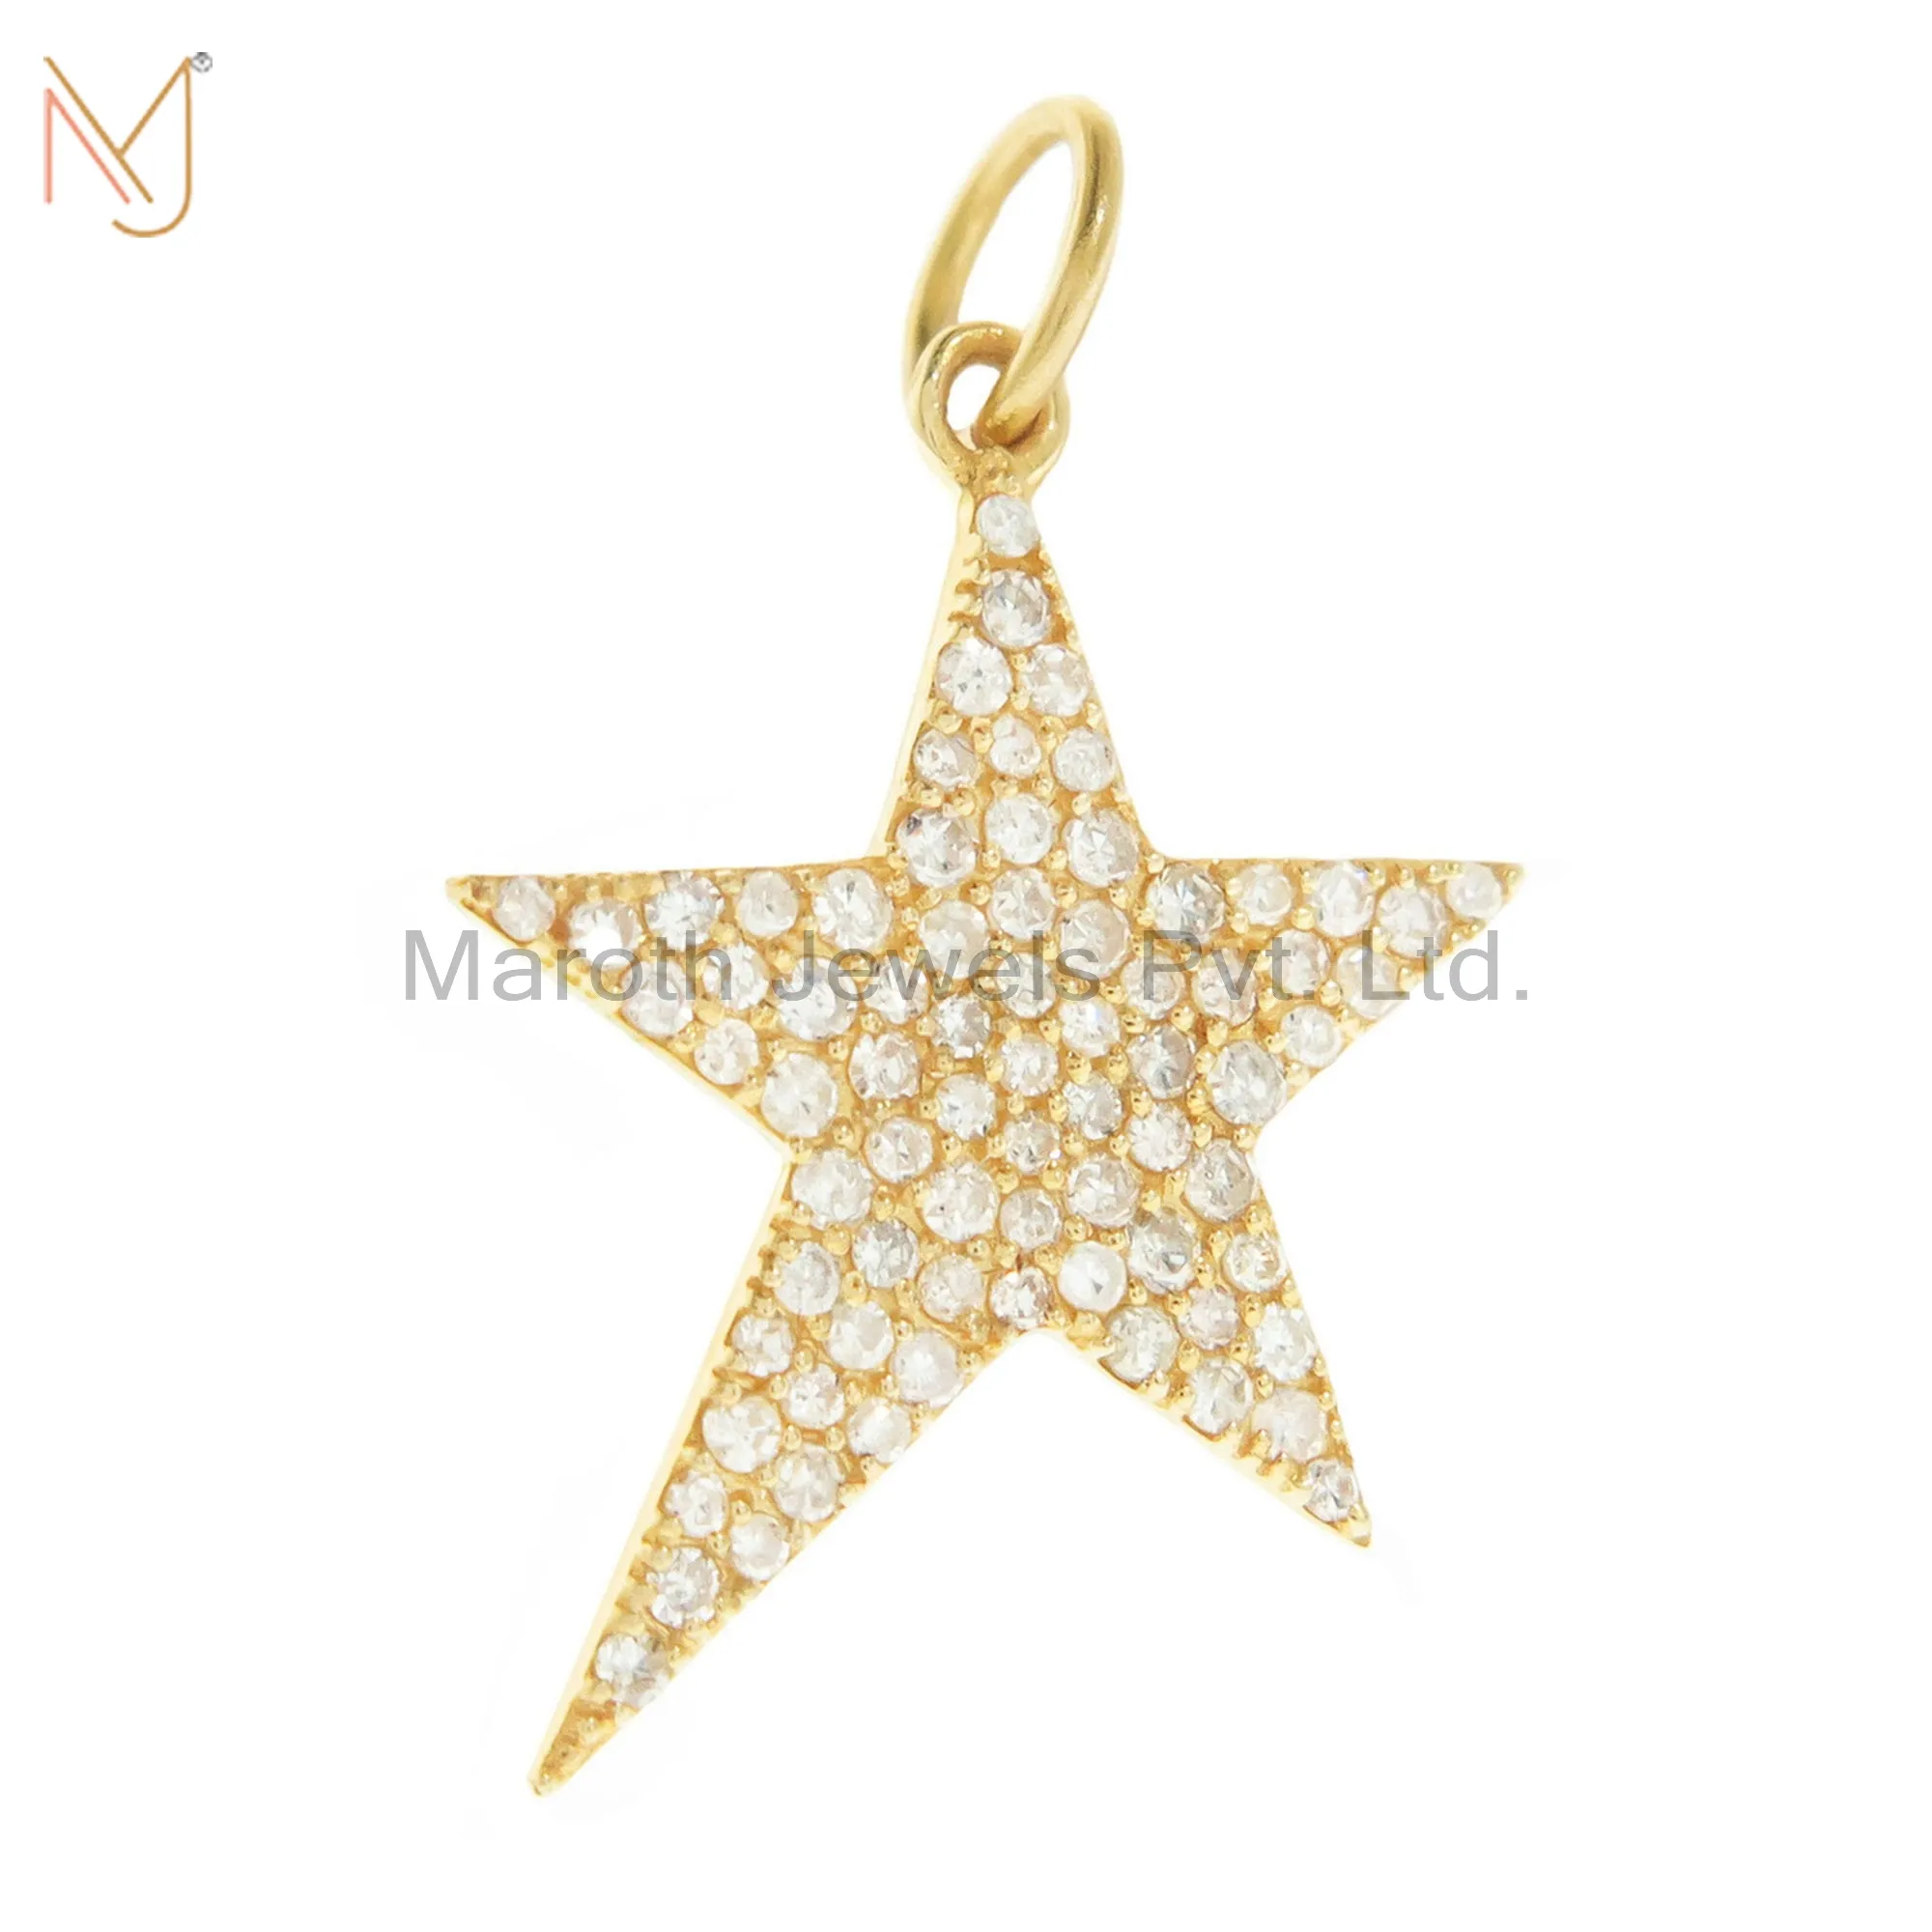 925 Silver Gold Vermeil Pave Diamond Star Charms Pendant Jewelry Manufacturer